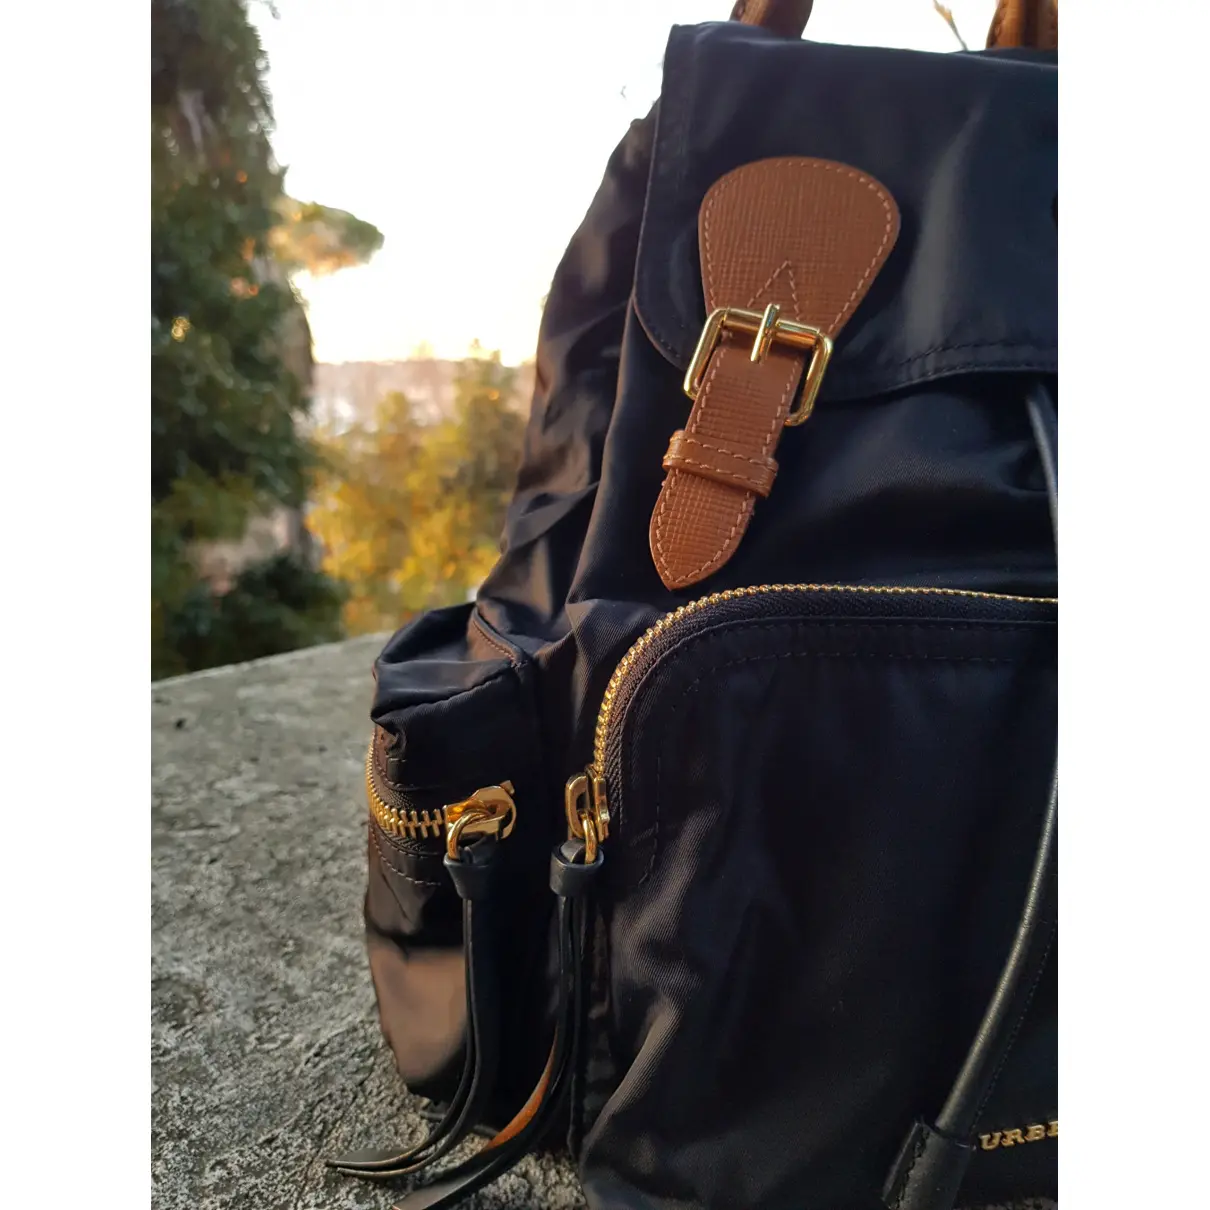 Buy Burberry The Rucksack cloth backpack online